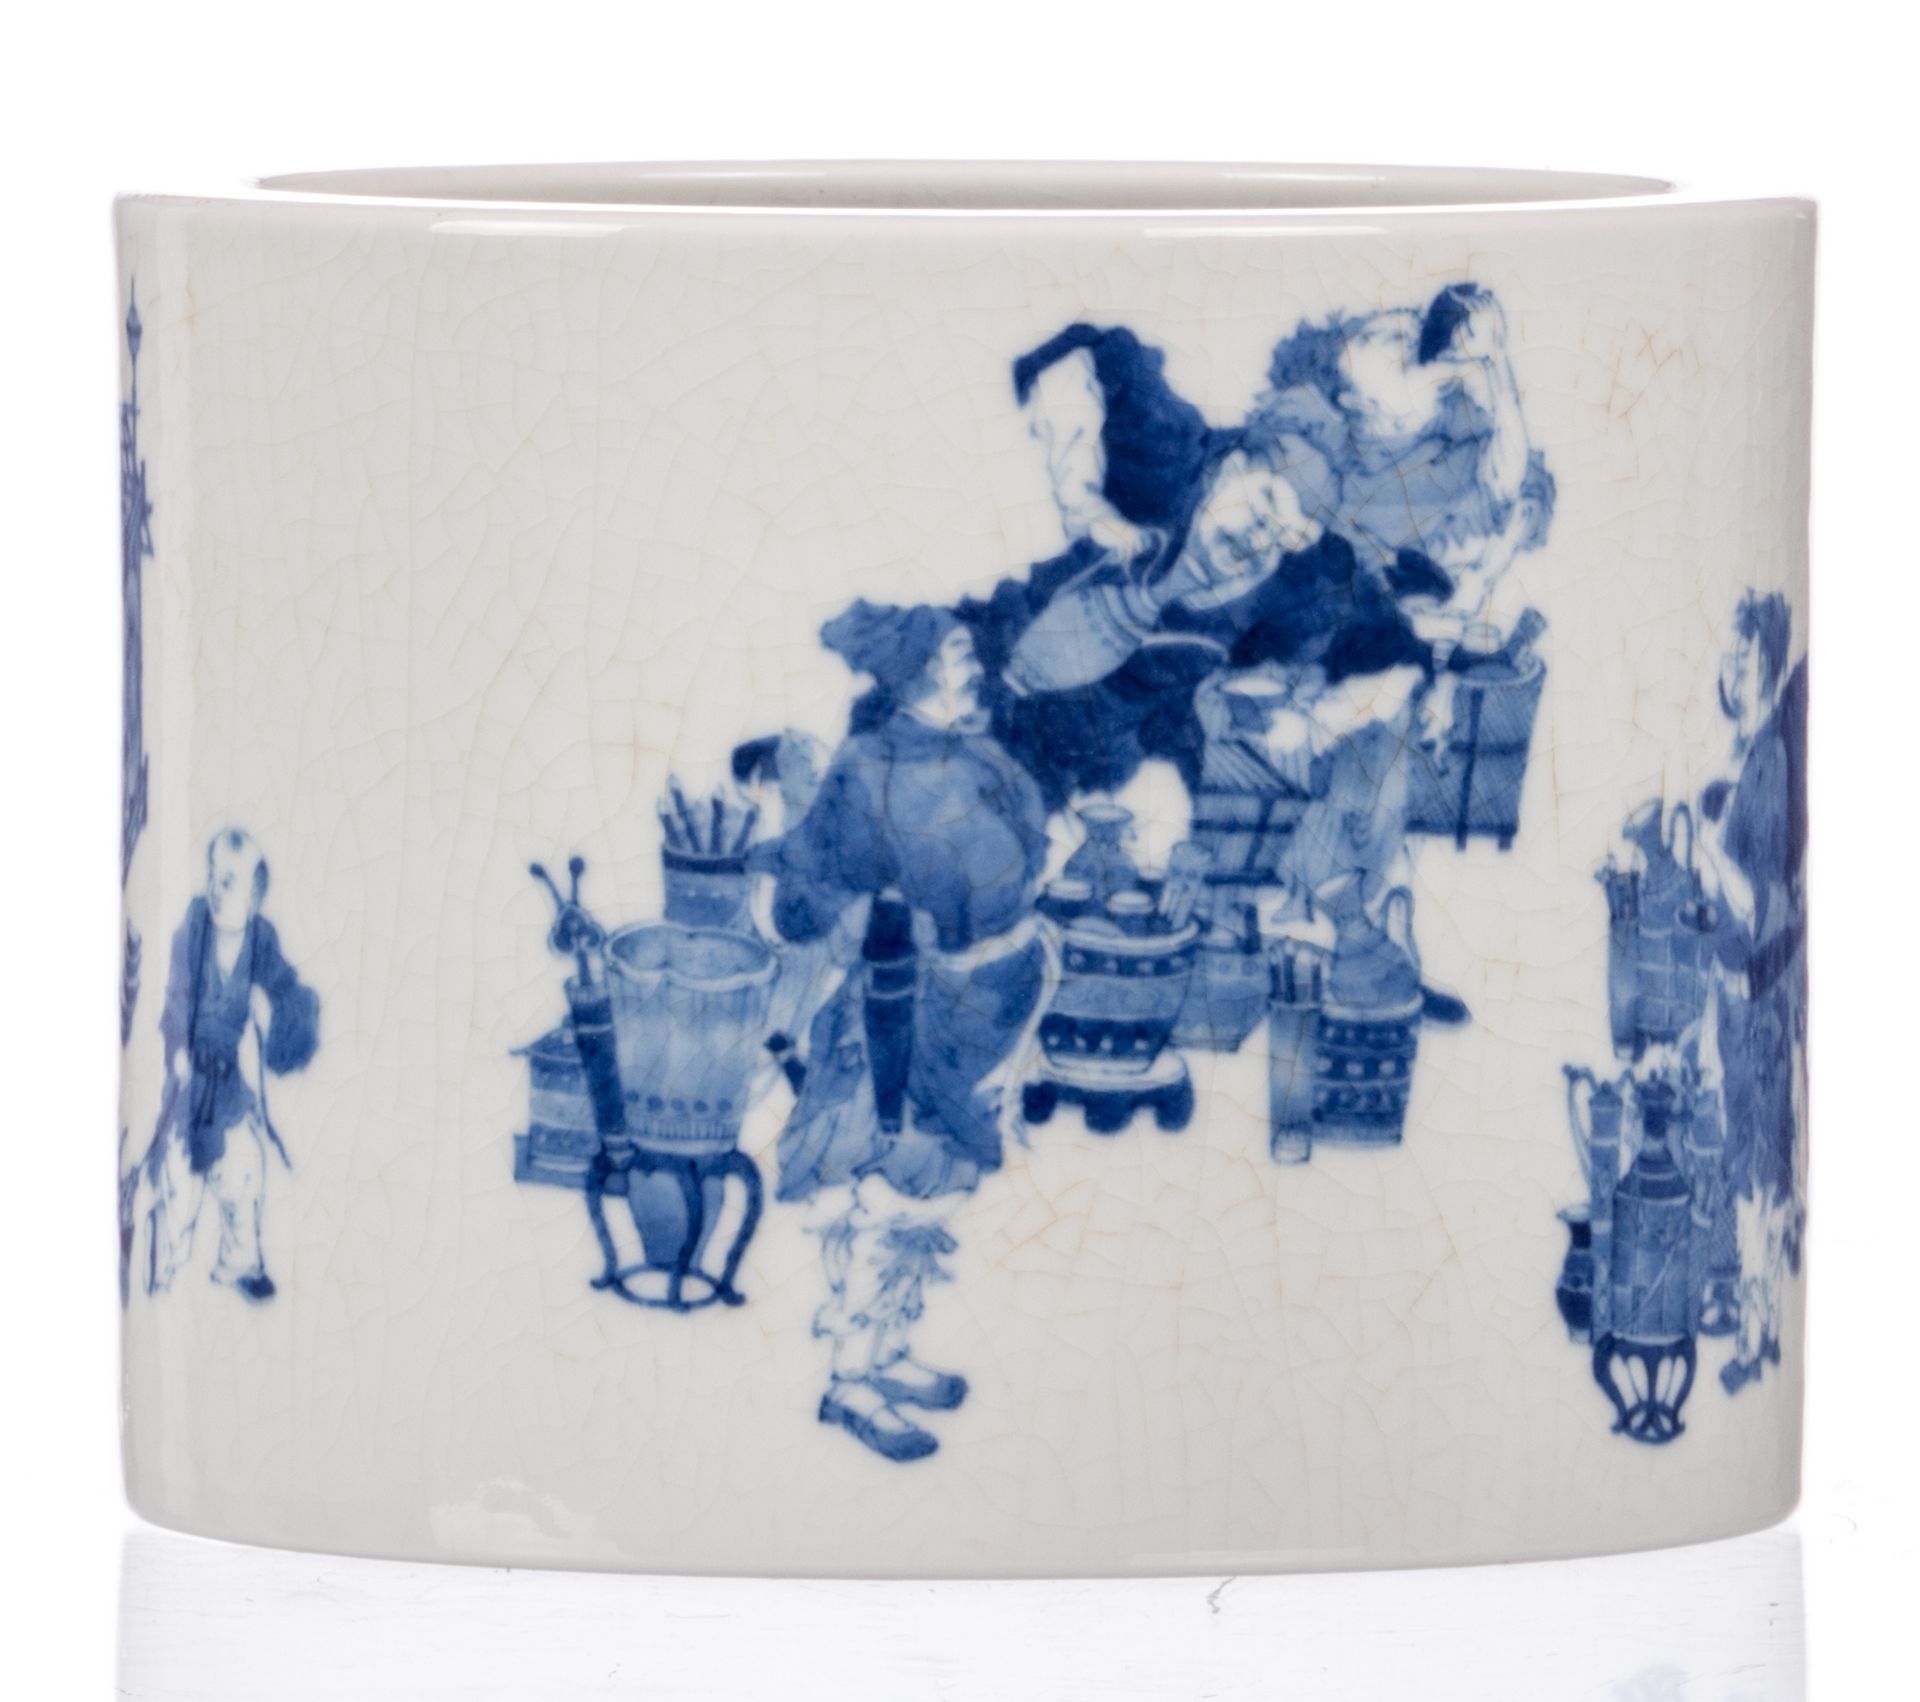 A Chinese blue and white brushpot, decorated with animated scenes, marked, 20thC, H 15 - Diameter 20 - Image 3 of 8